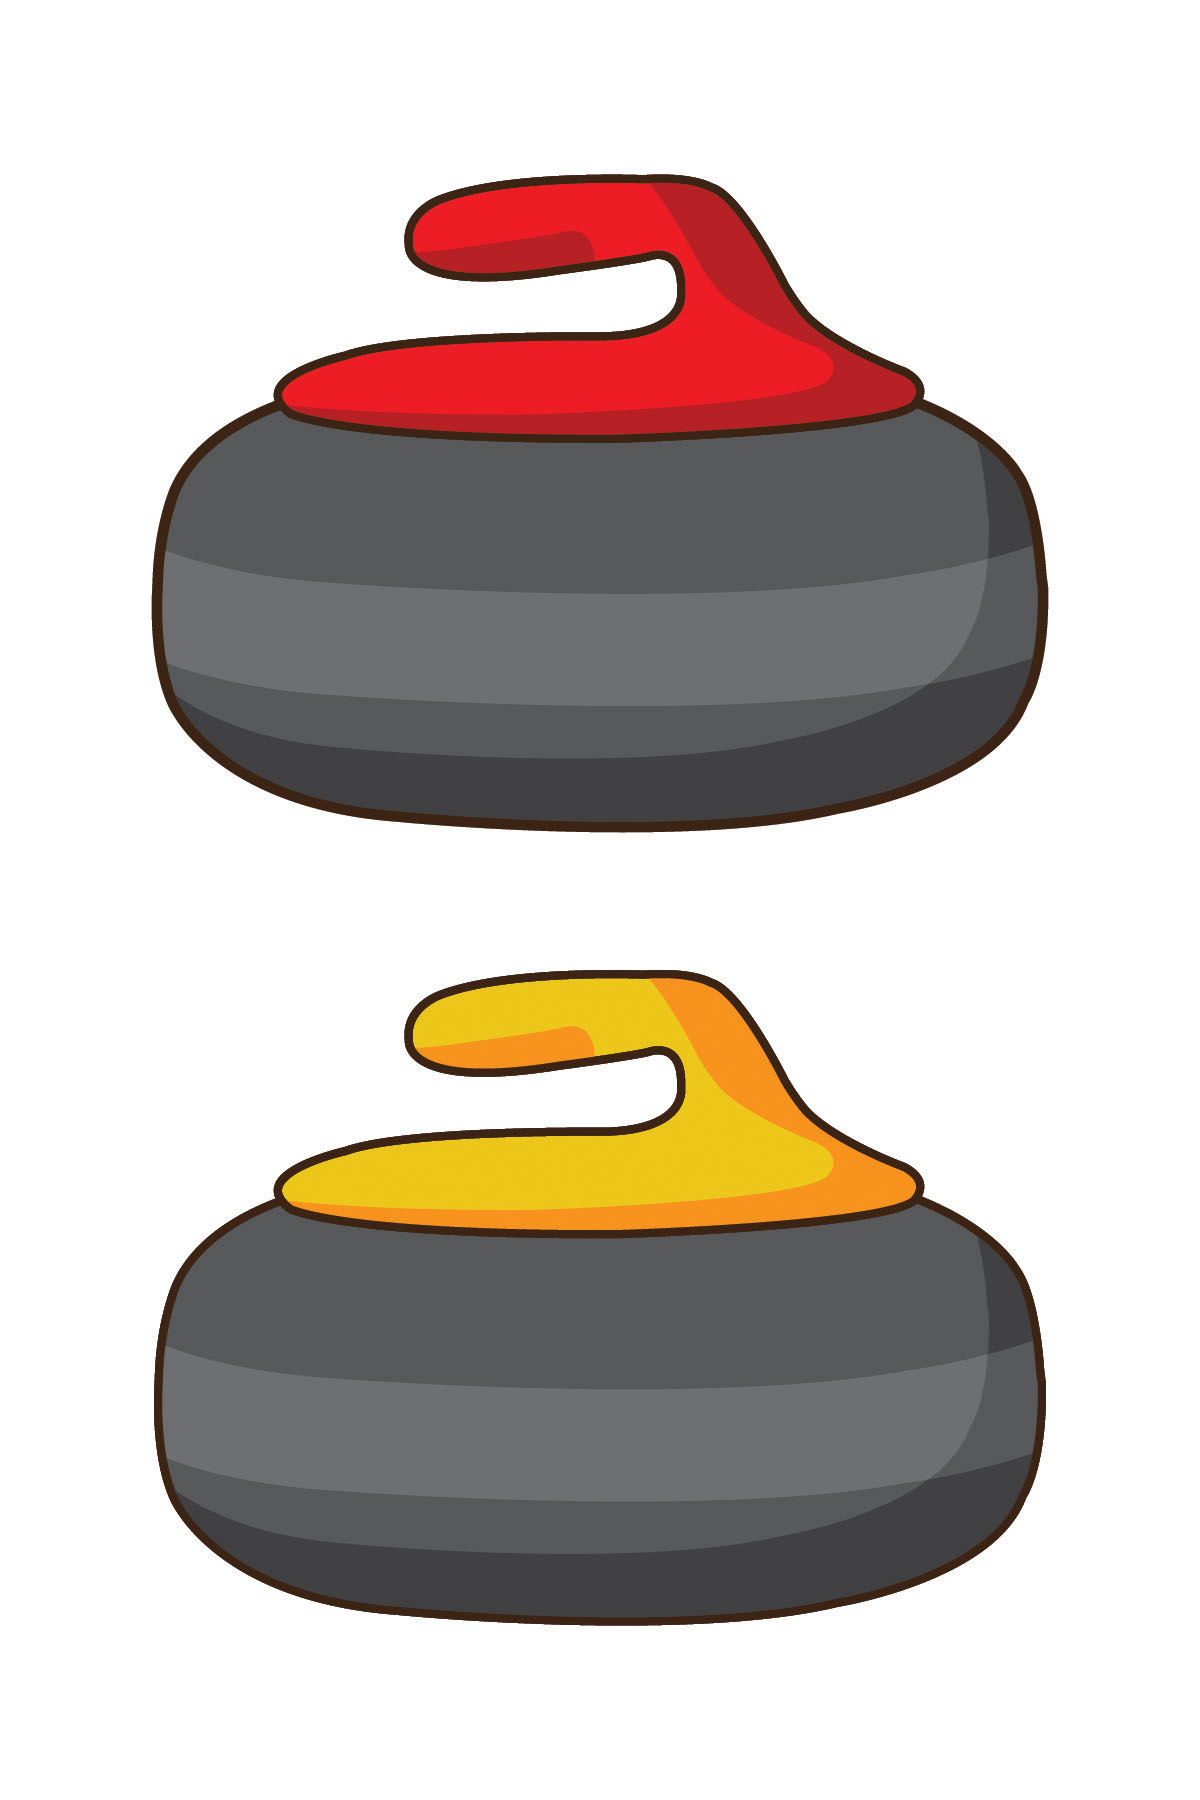 curling rings clipart - photo #3